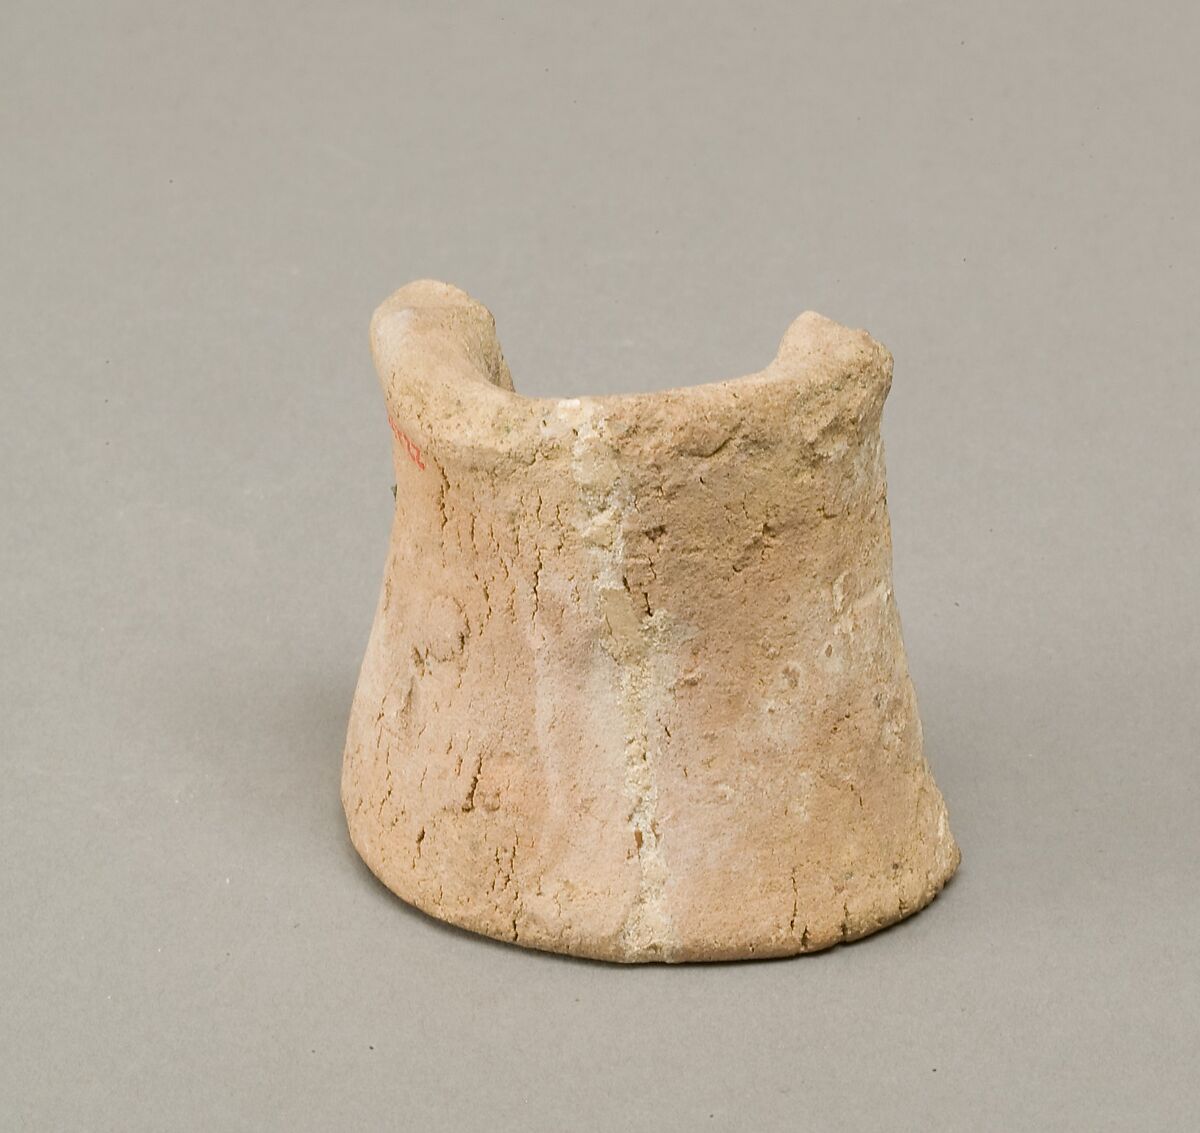 Vase neck fragment, Low-fired whitish clay 